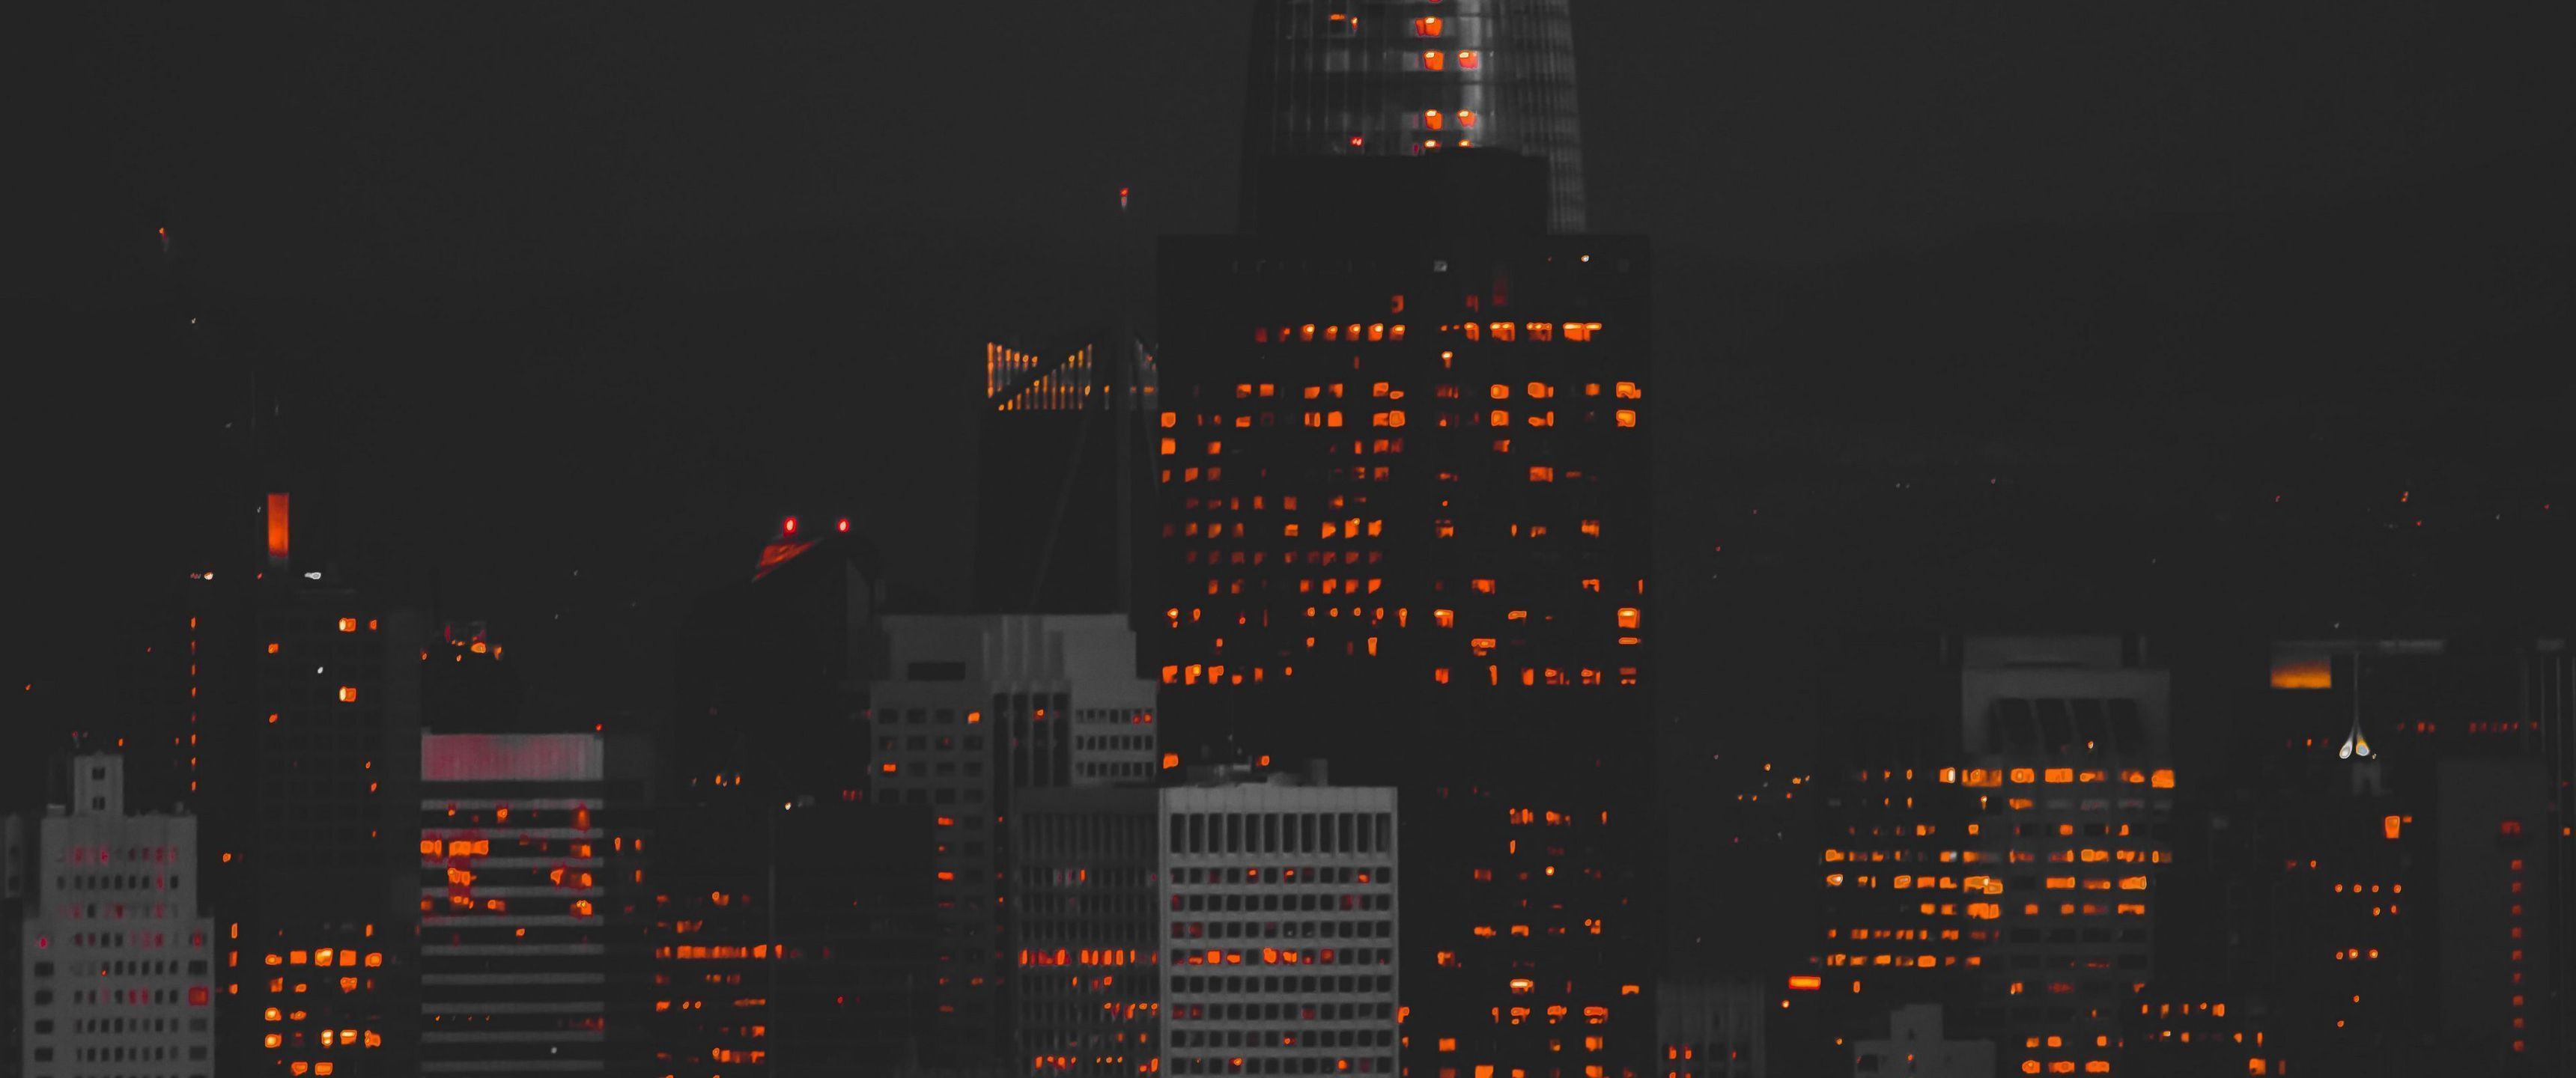 A city skyline at night with the buildings lit up - 3440x1440